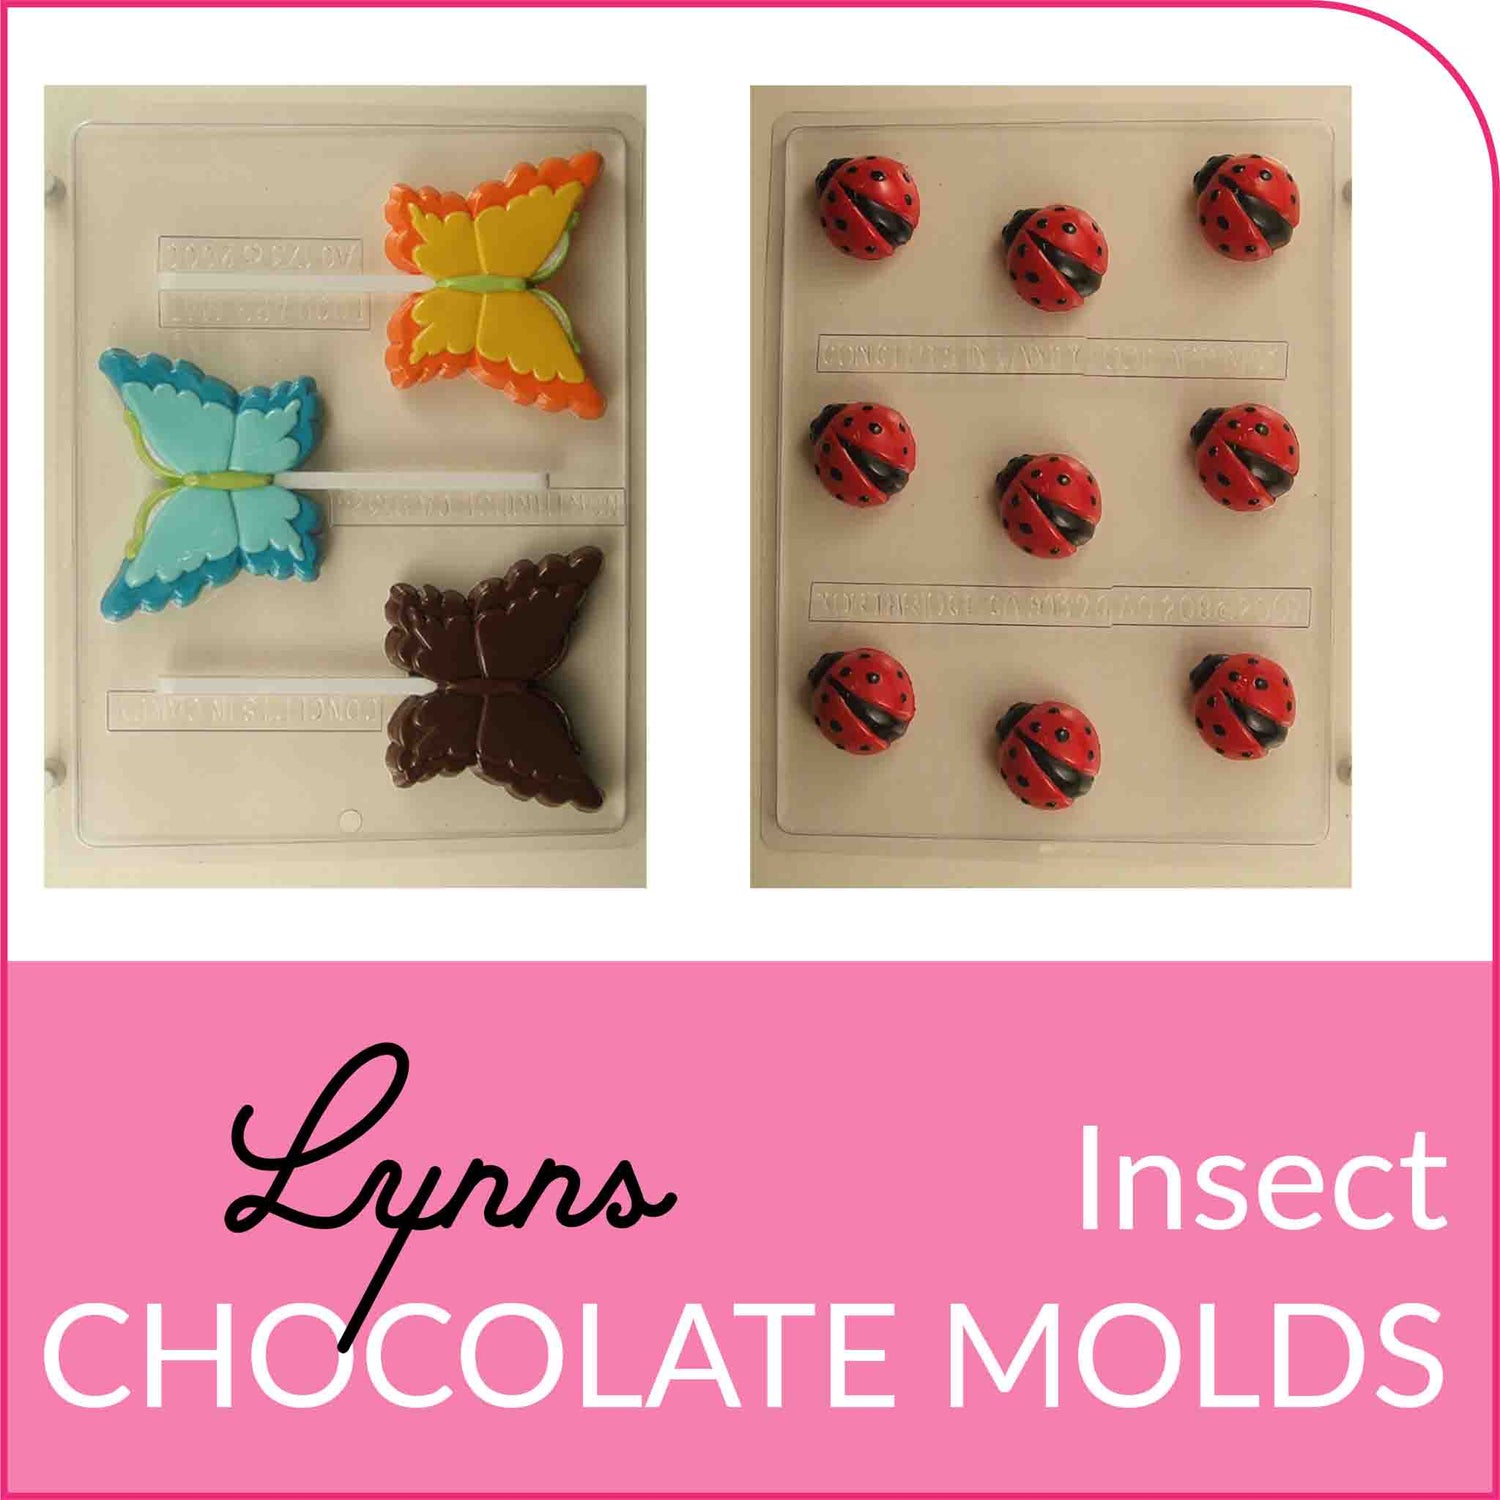 Shop Insect and Bug Shaped Chocolate Molds from Lynn's